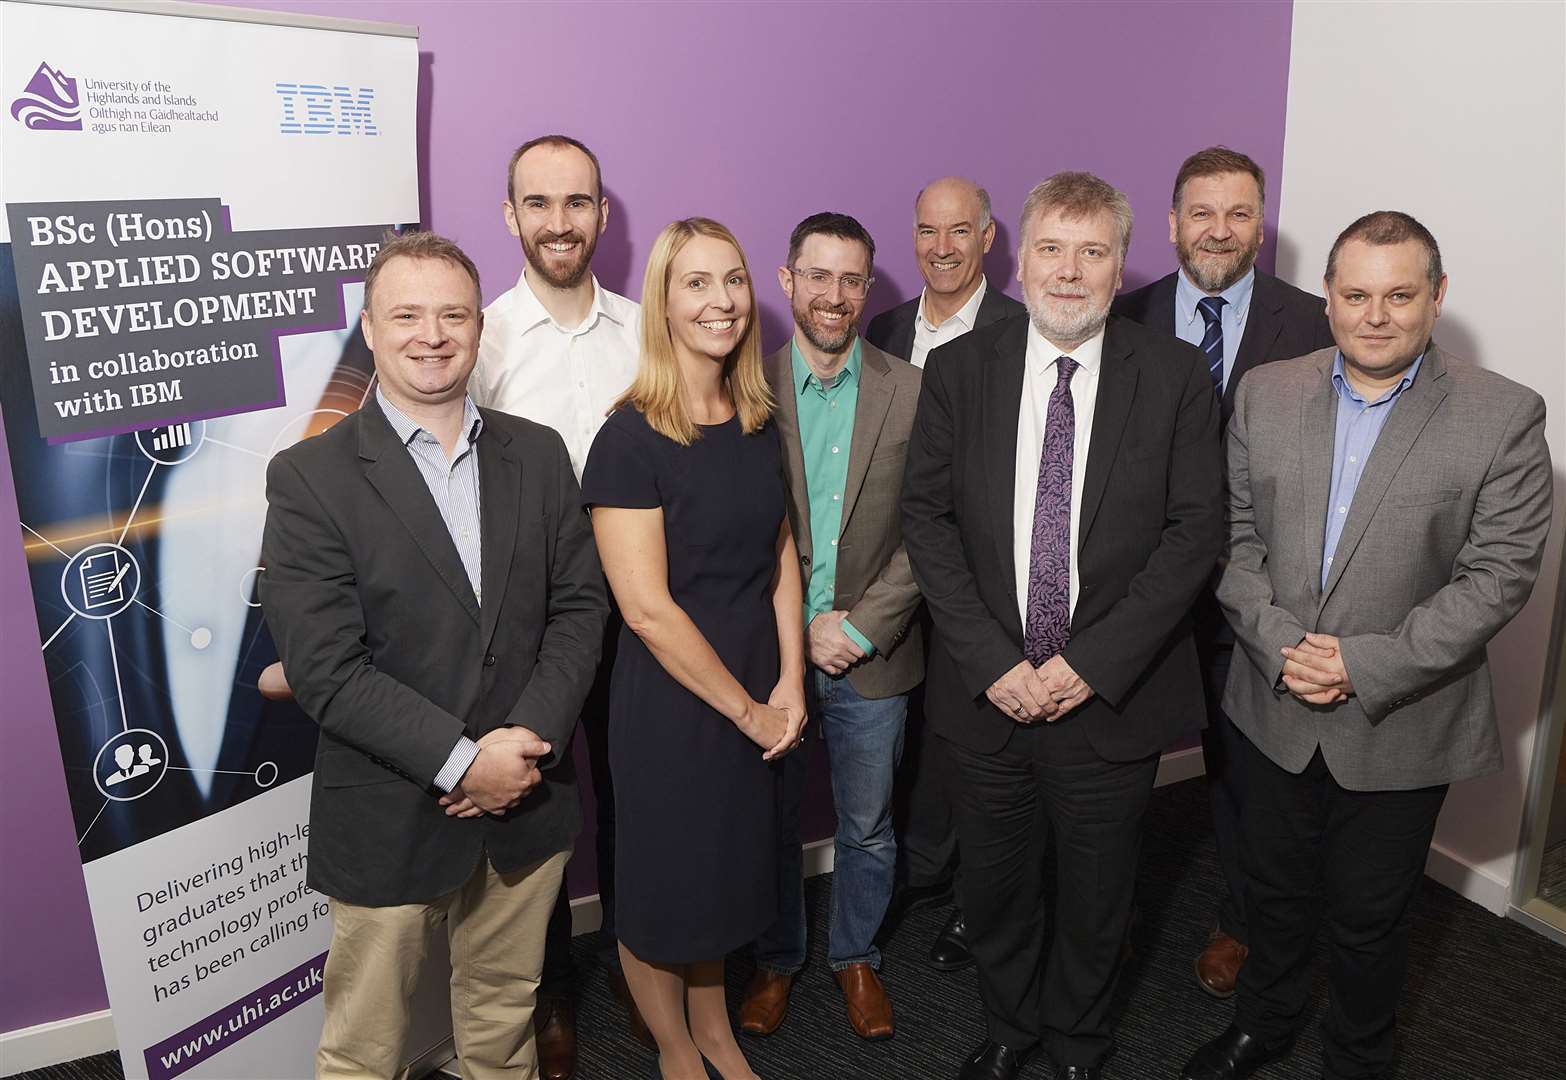 University of the Highlands and Islands and IBM colleagues at the launch of the new degree. From left: Dr Tom McCallum, Douglas Barr, Dr Petrena Prince (IBM), Lee Wilson (IBM), James Flynn (IBM), Professor Crichton Lang, Dr Gary Campbell and John McNamara (IBM).